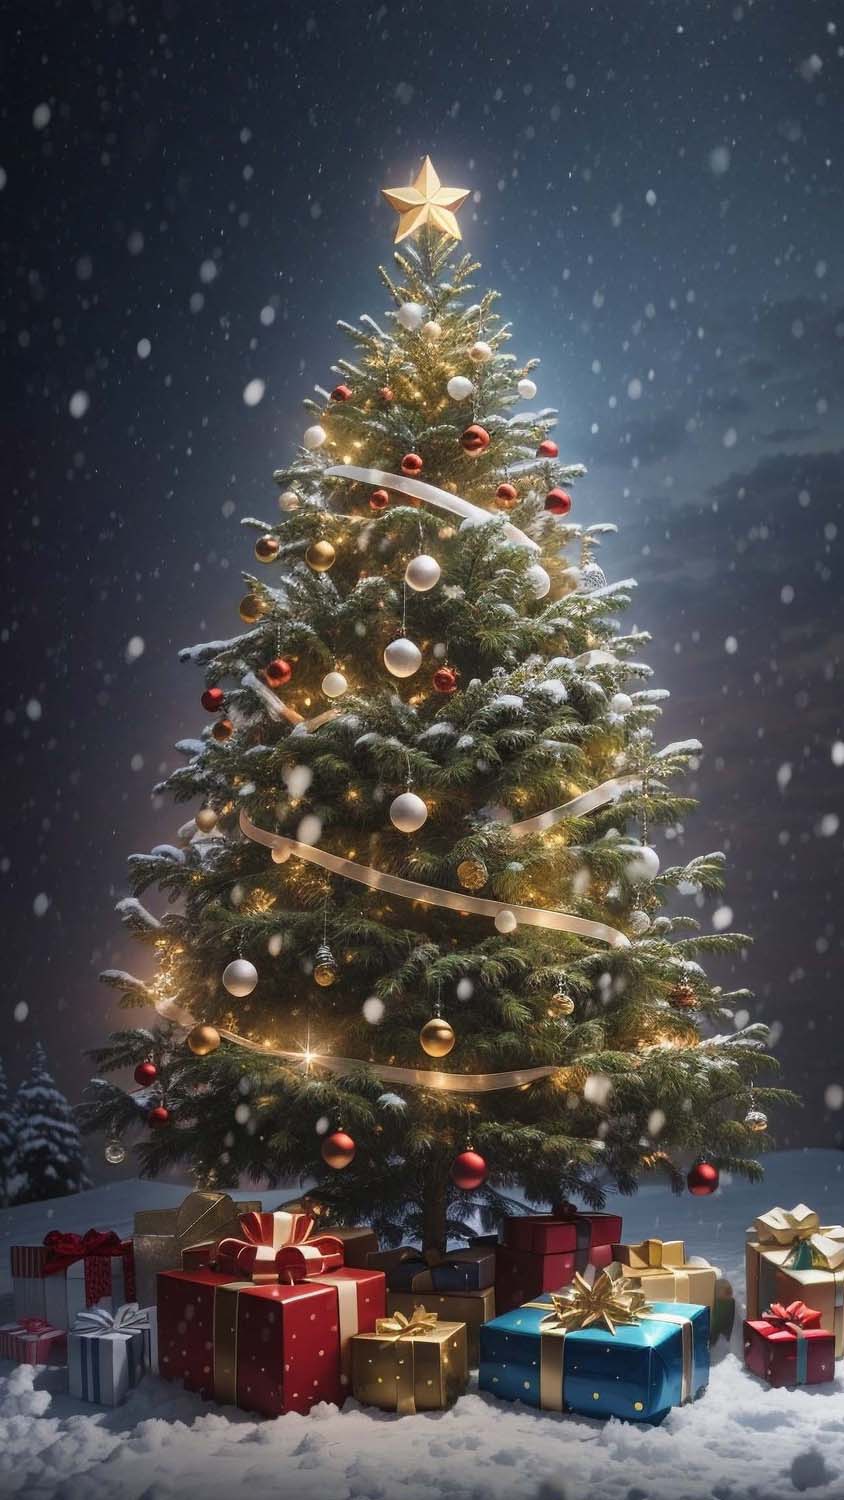 Christmas Tree Gifts iPhone Wallpaper 4K